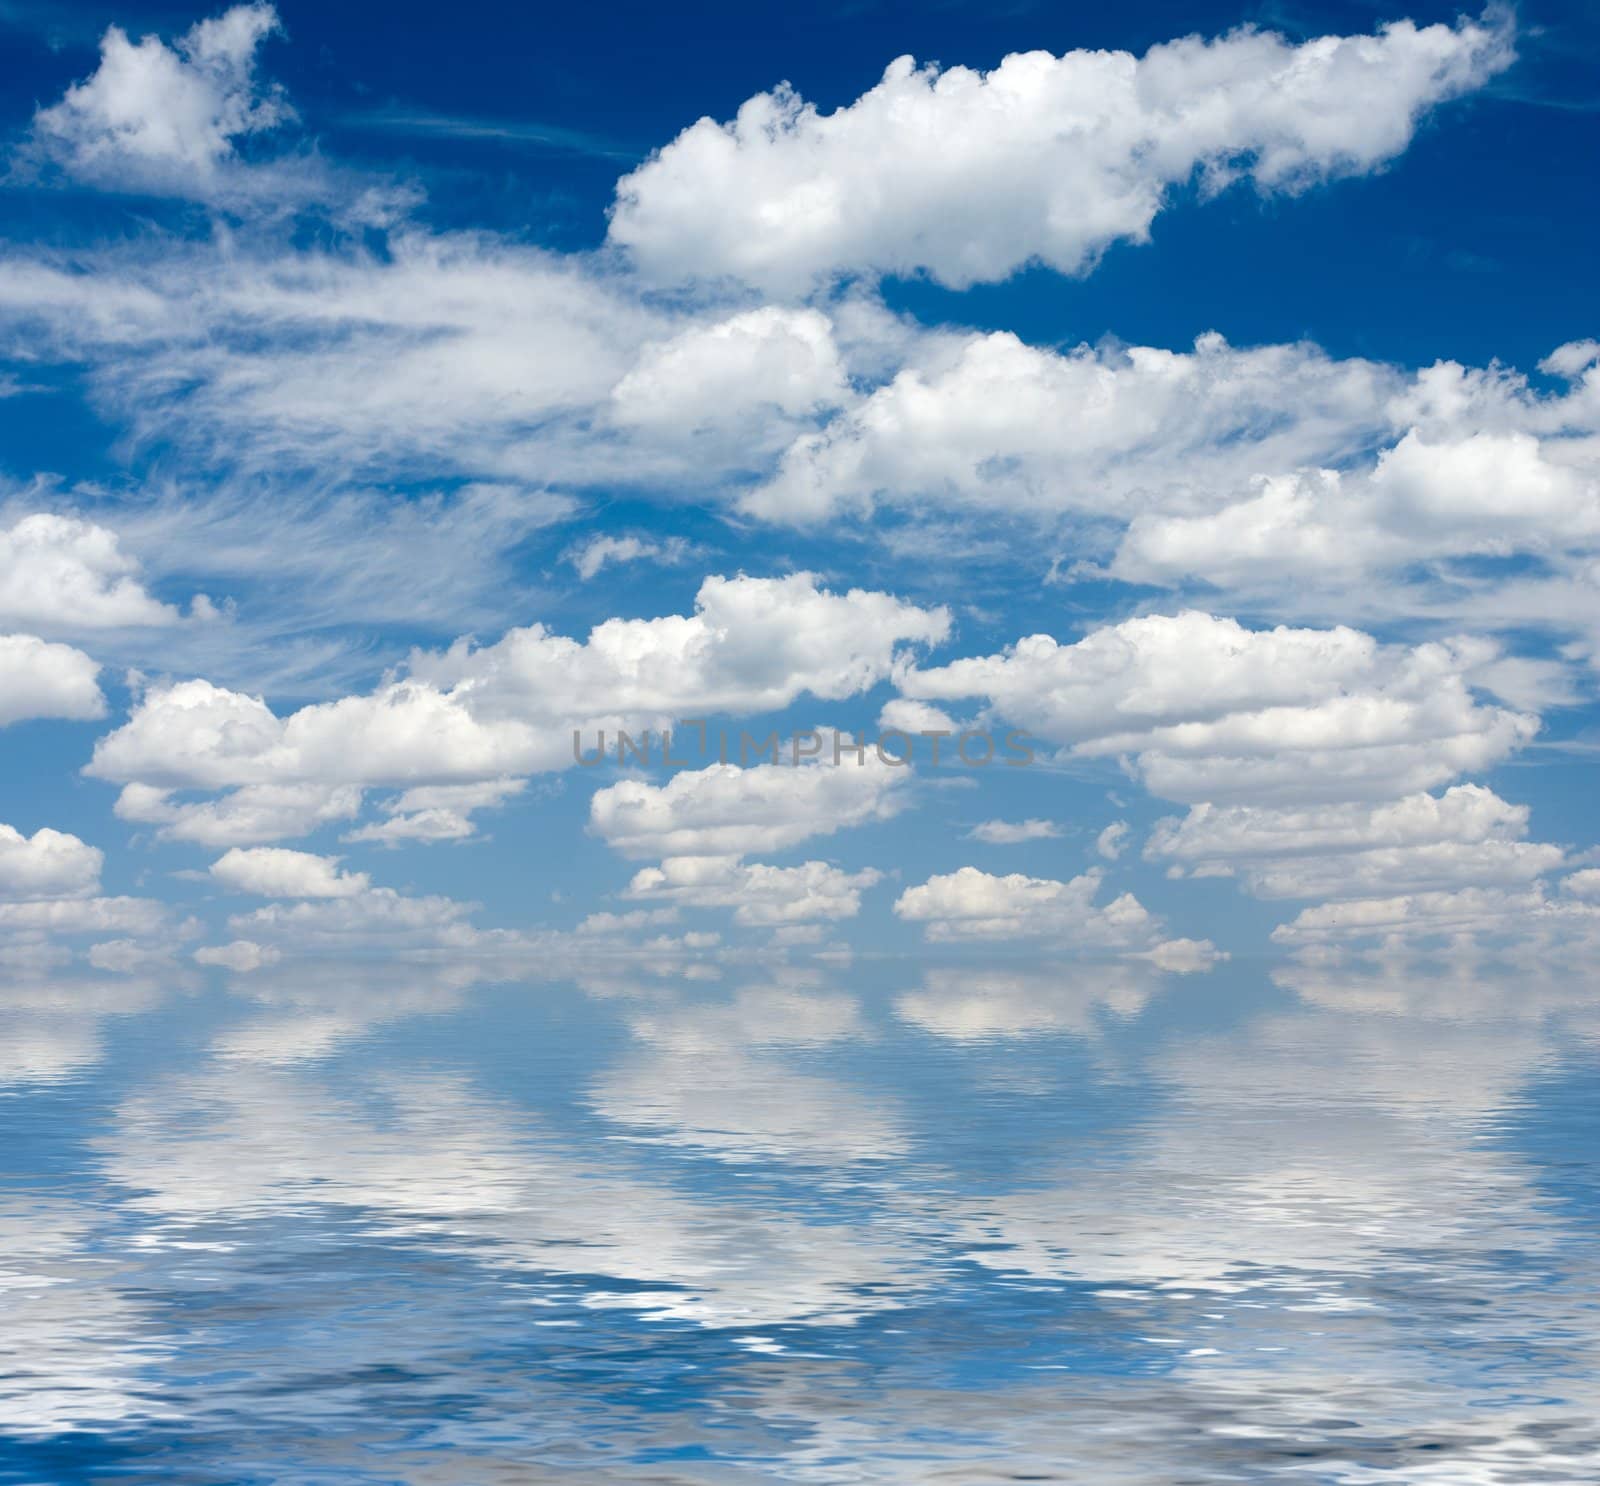 Blue sky with small clouds and reflection in rendered water